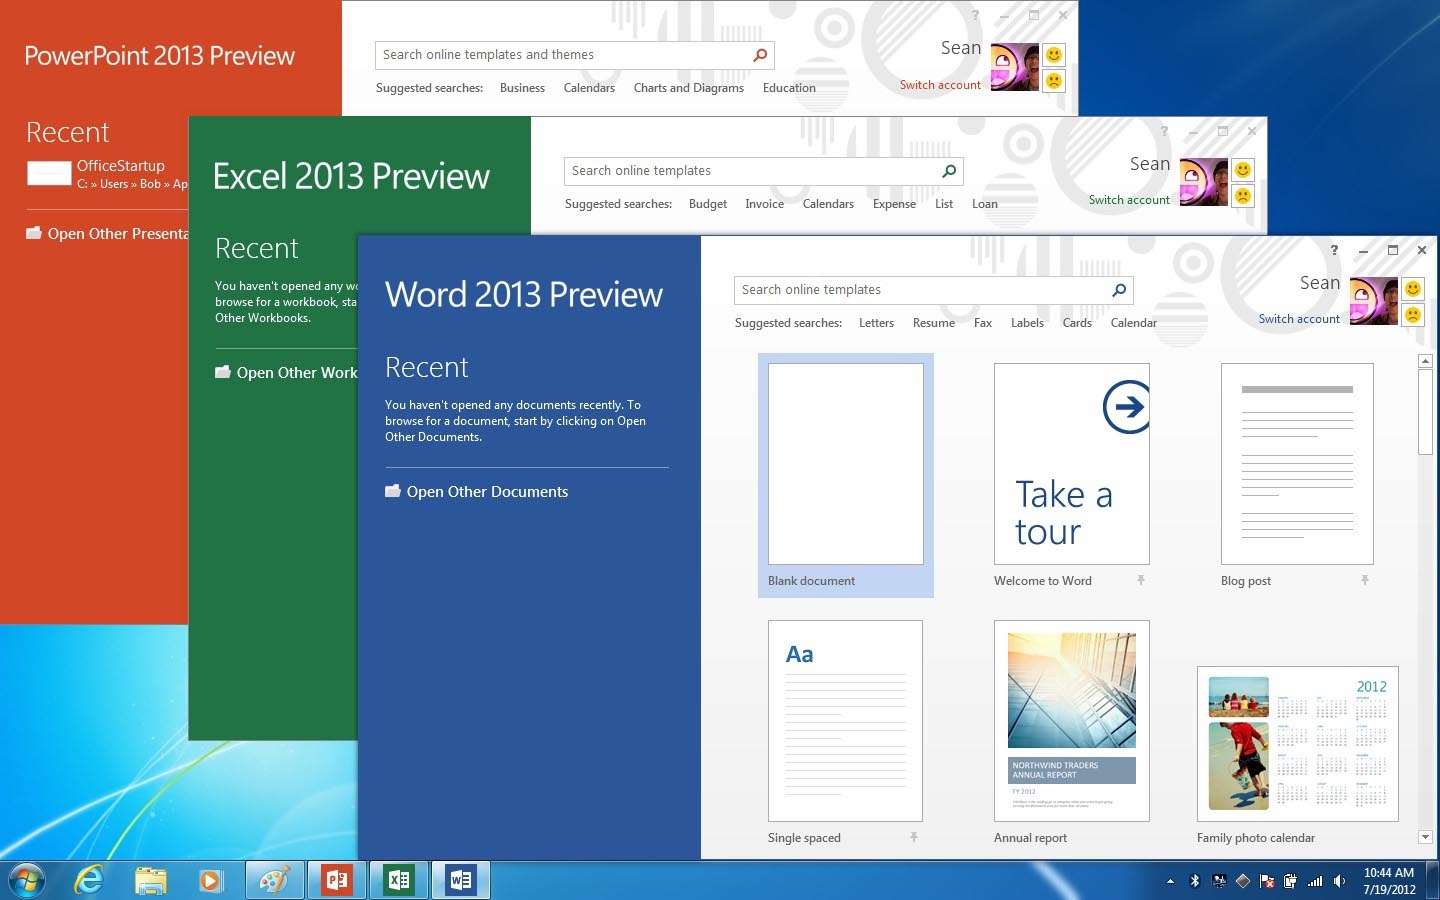 Office 365 for the home: Office Web Apps, SkyDrive, Skype explained -  Services - Software - Business IT